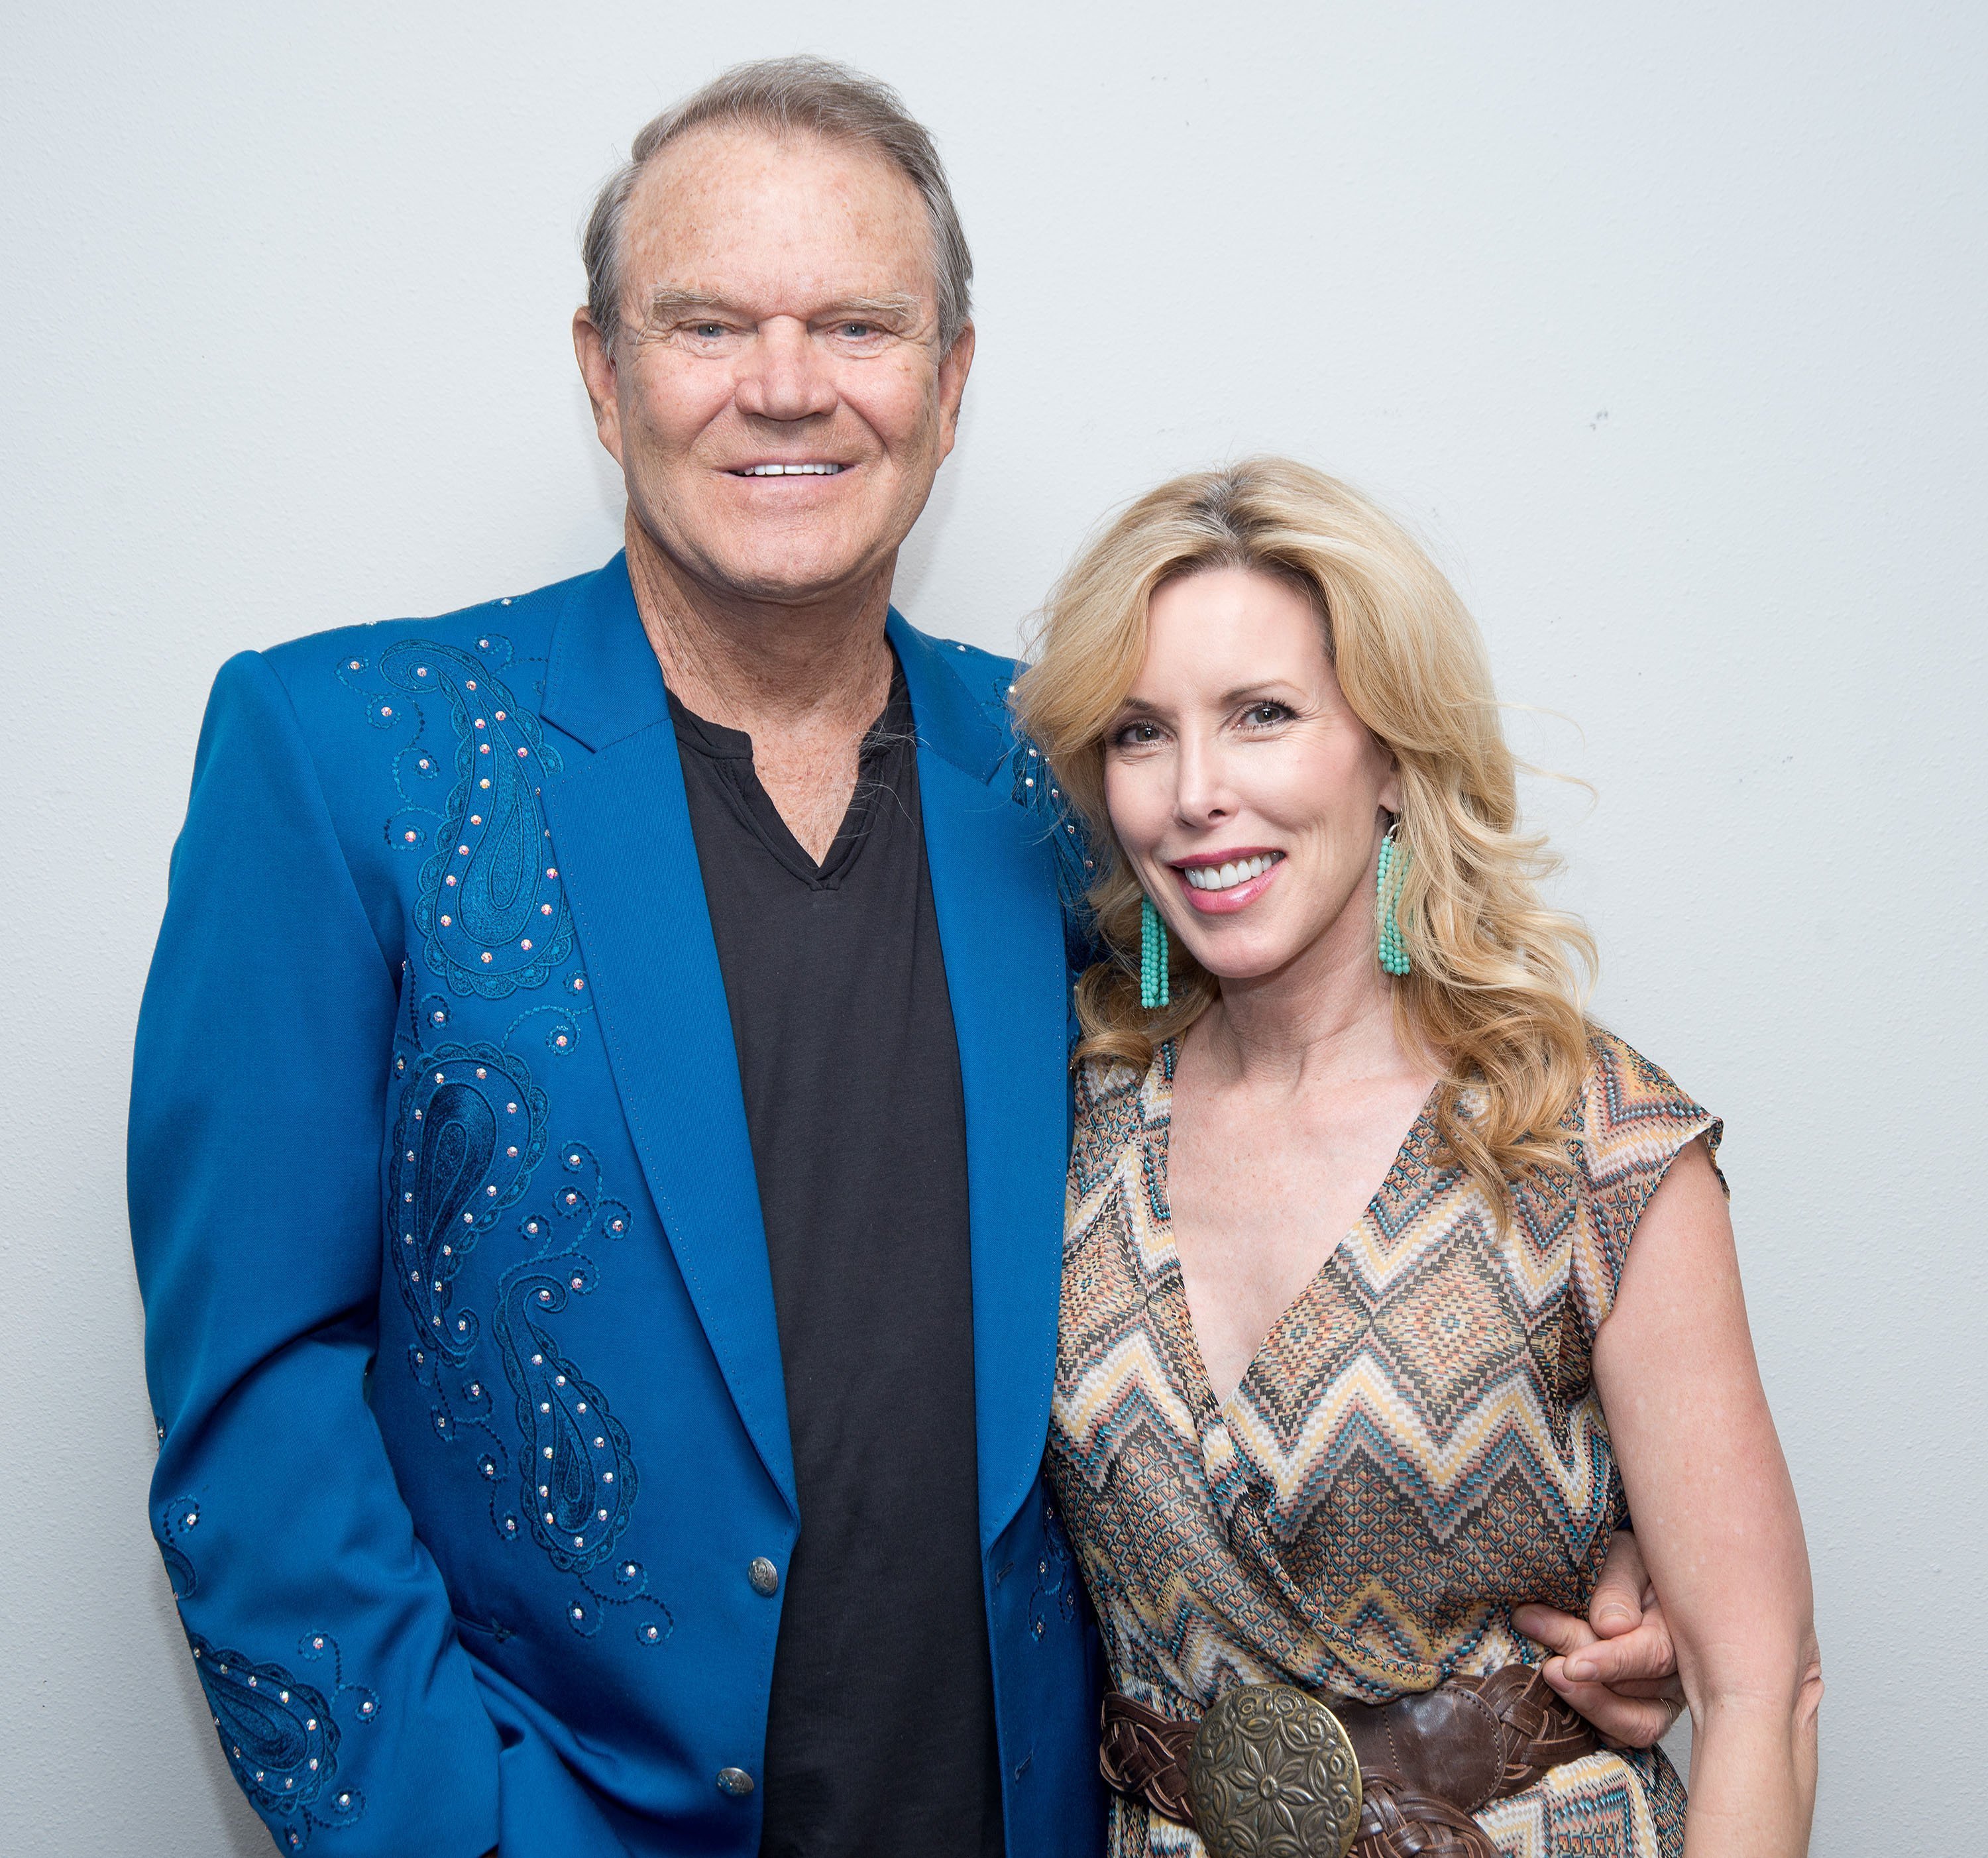 Glen Campbell and wife Kim during his Goodbye Tour performance at Route 66 Casino's Legends Theater on July 29, 2012. | Photo: GettyImages